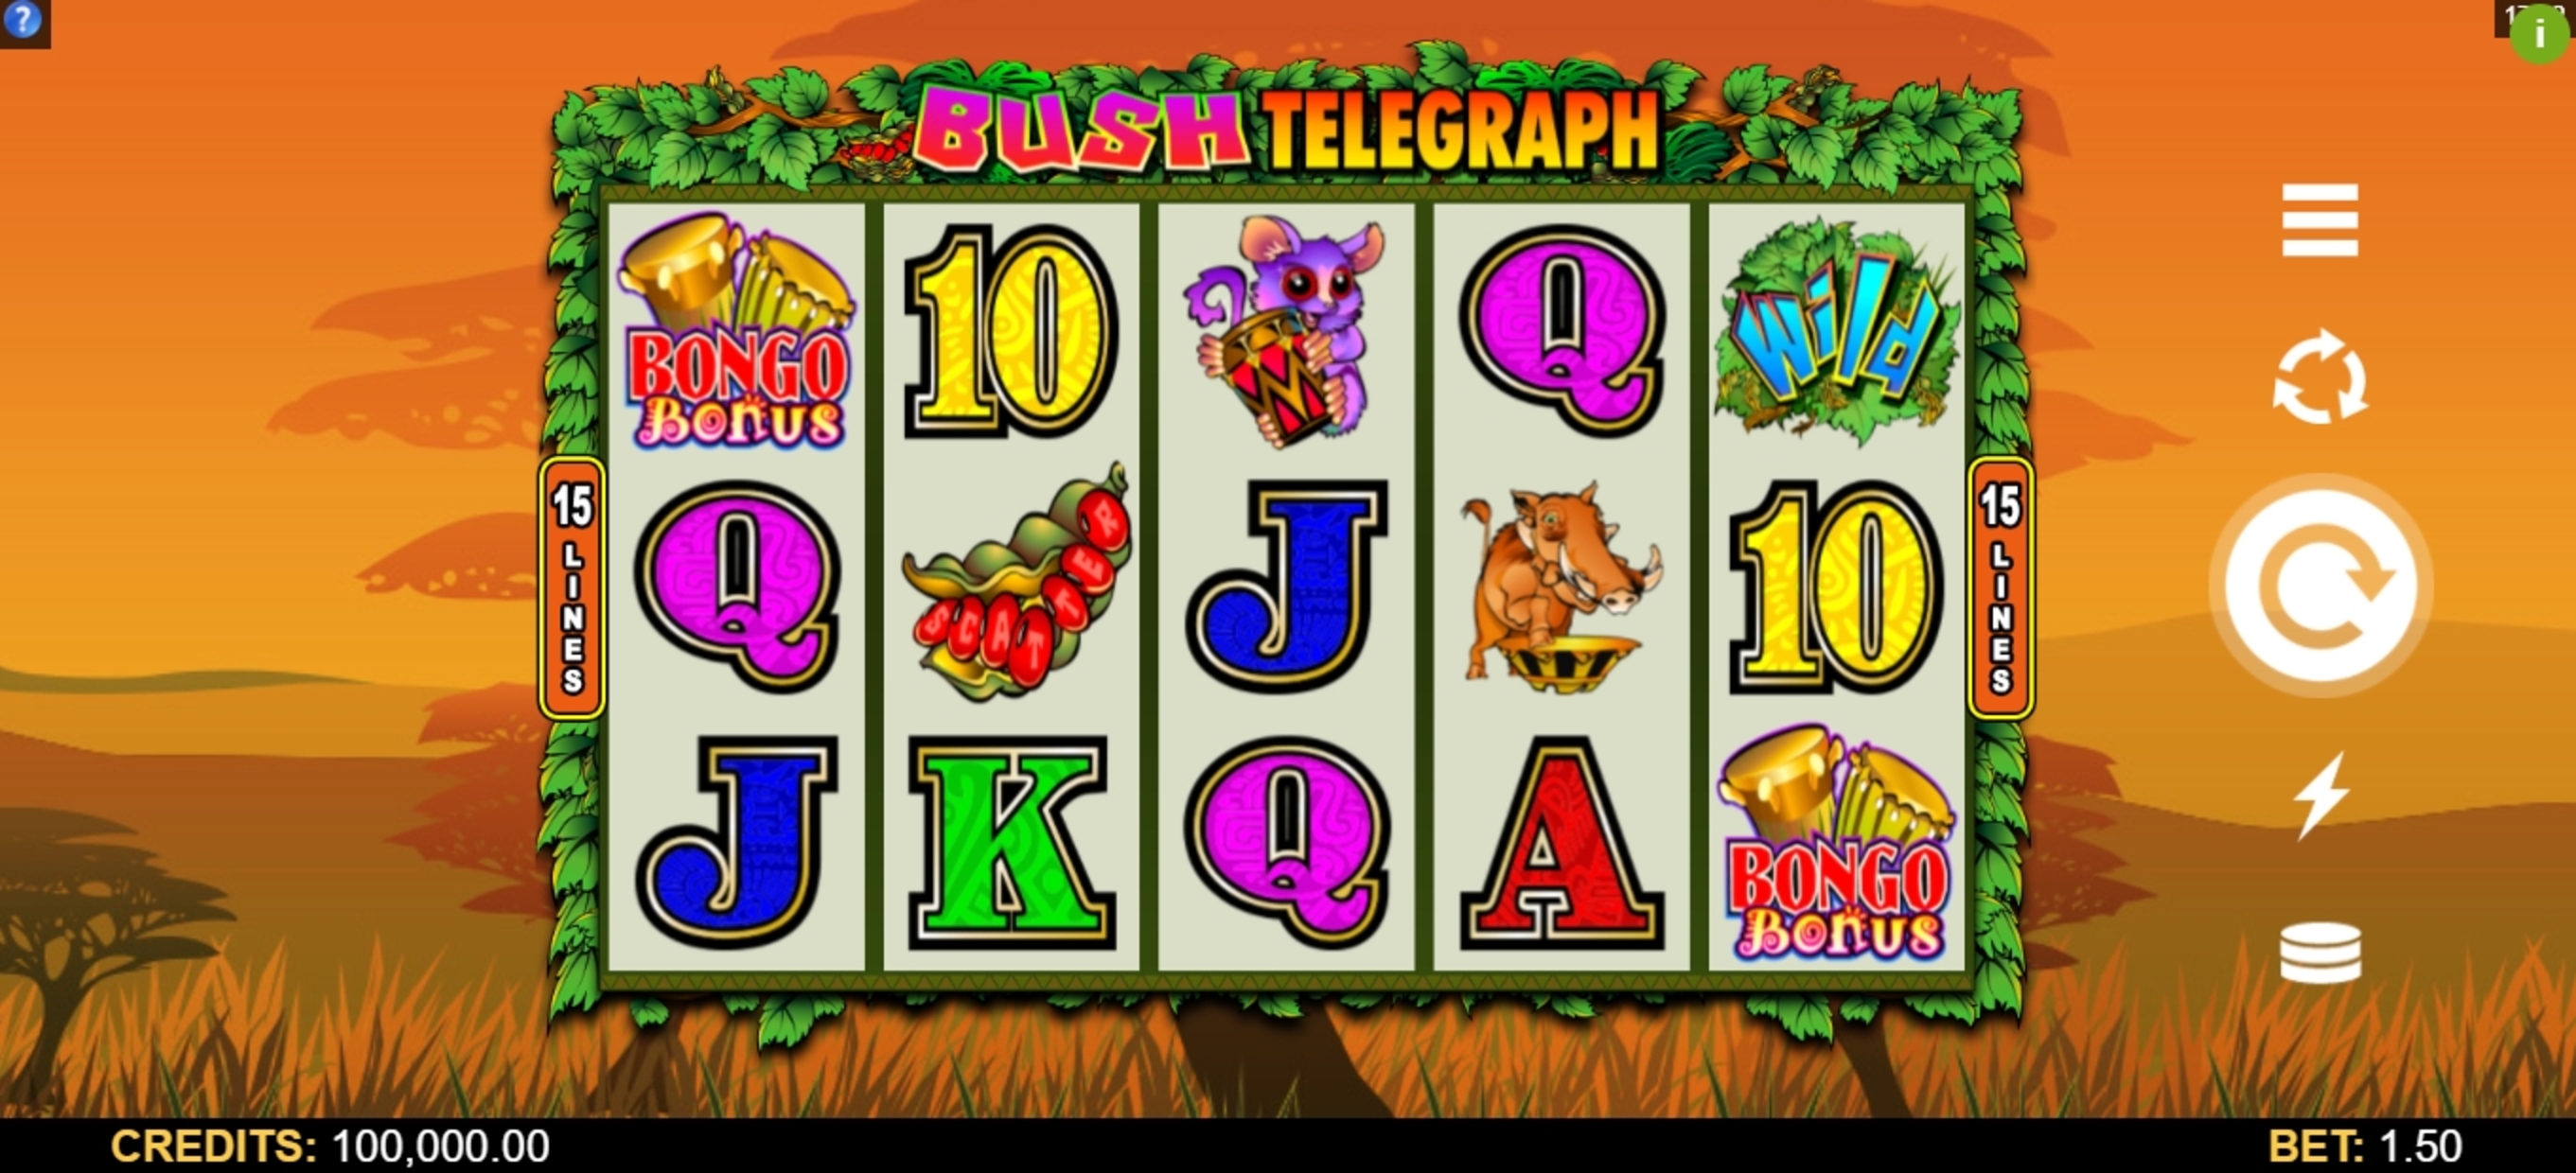 Reels in Bush Telegraph Slot Game by Microgaming